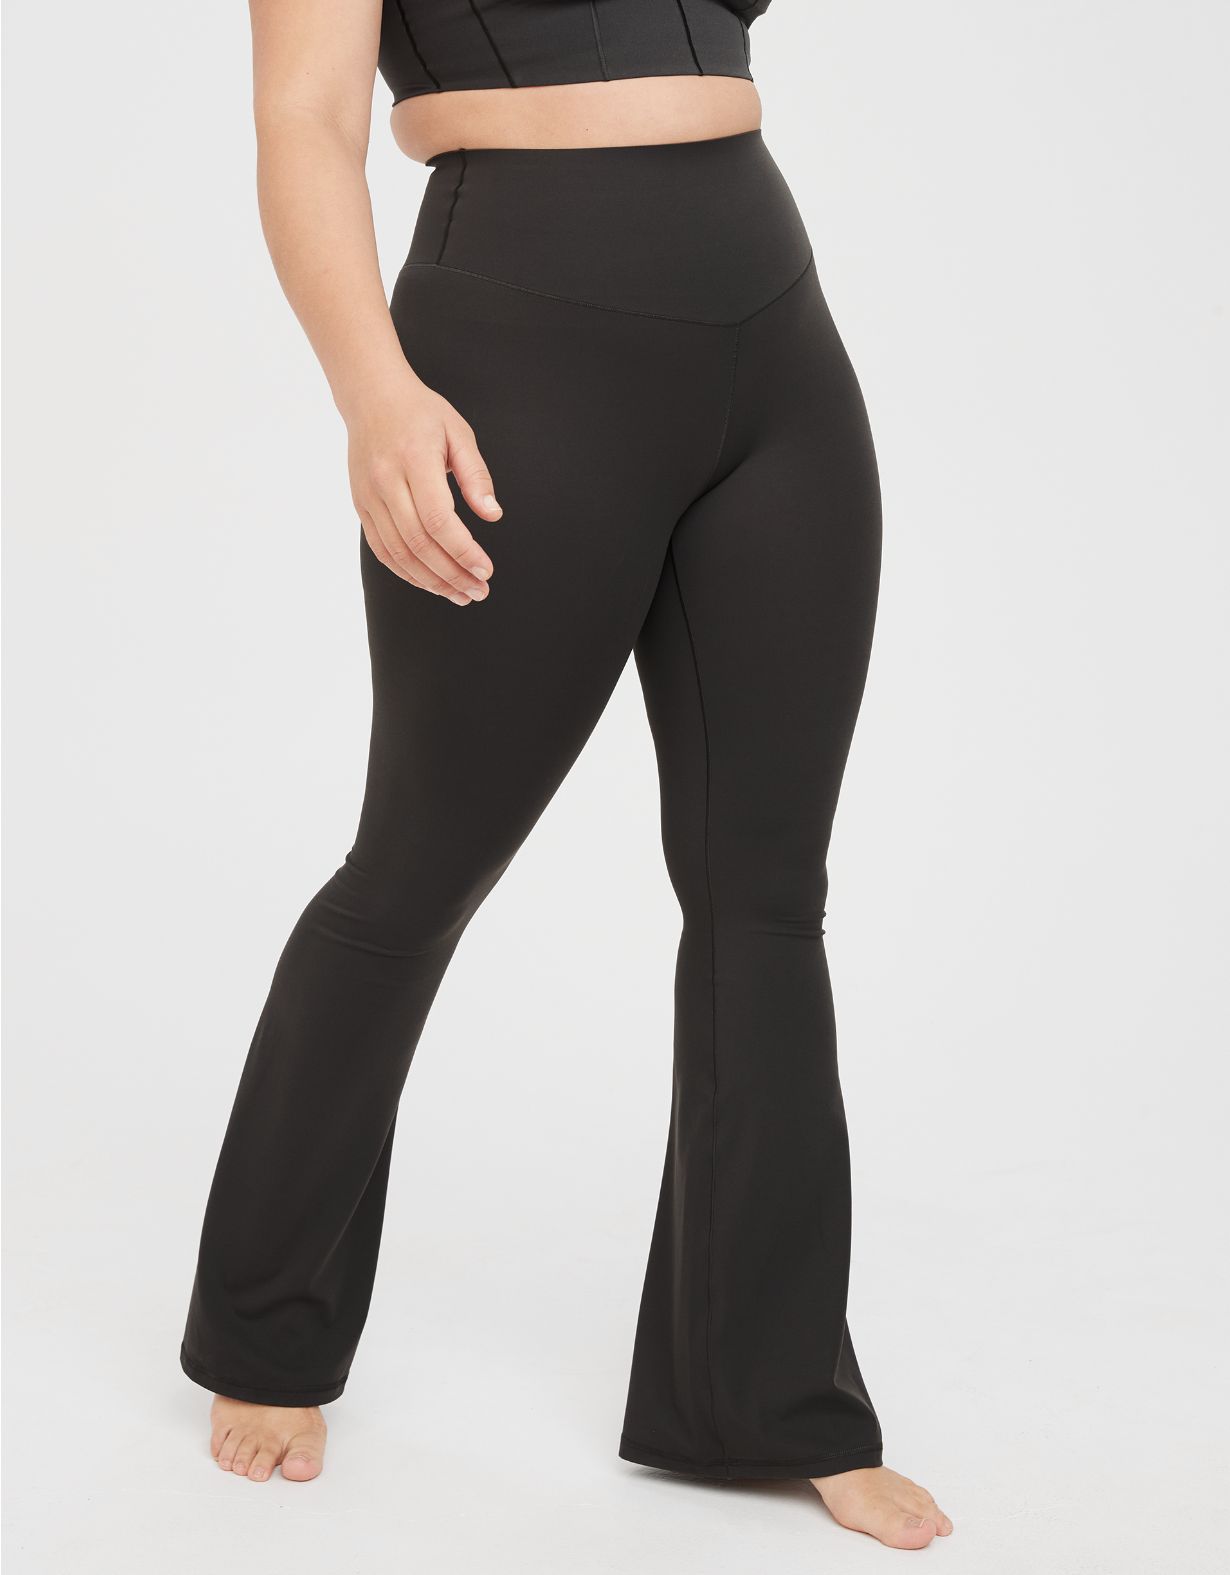 OFFLINE By Aerie Real Me Xtra Hold Up! Legging Flare